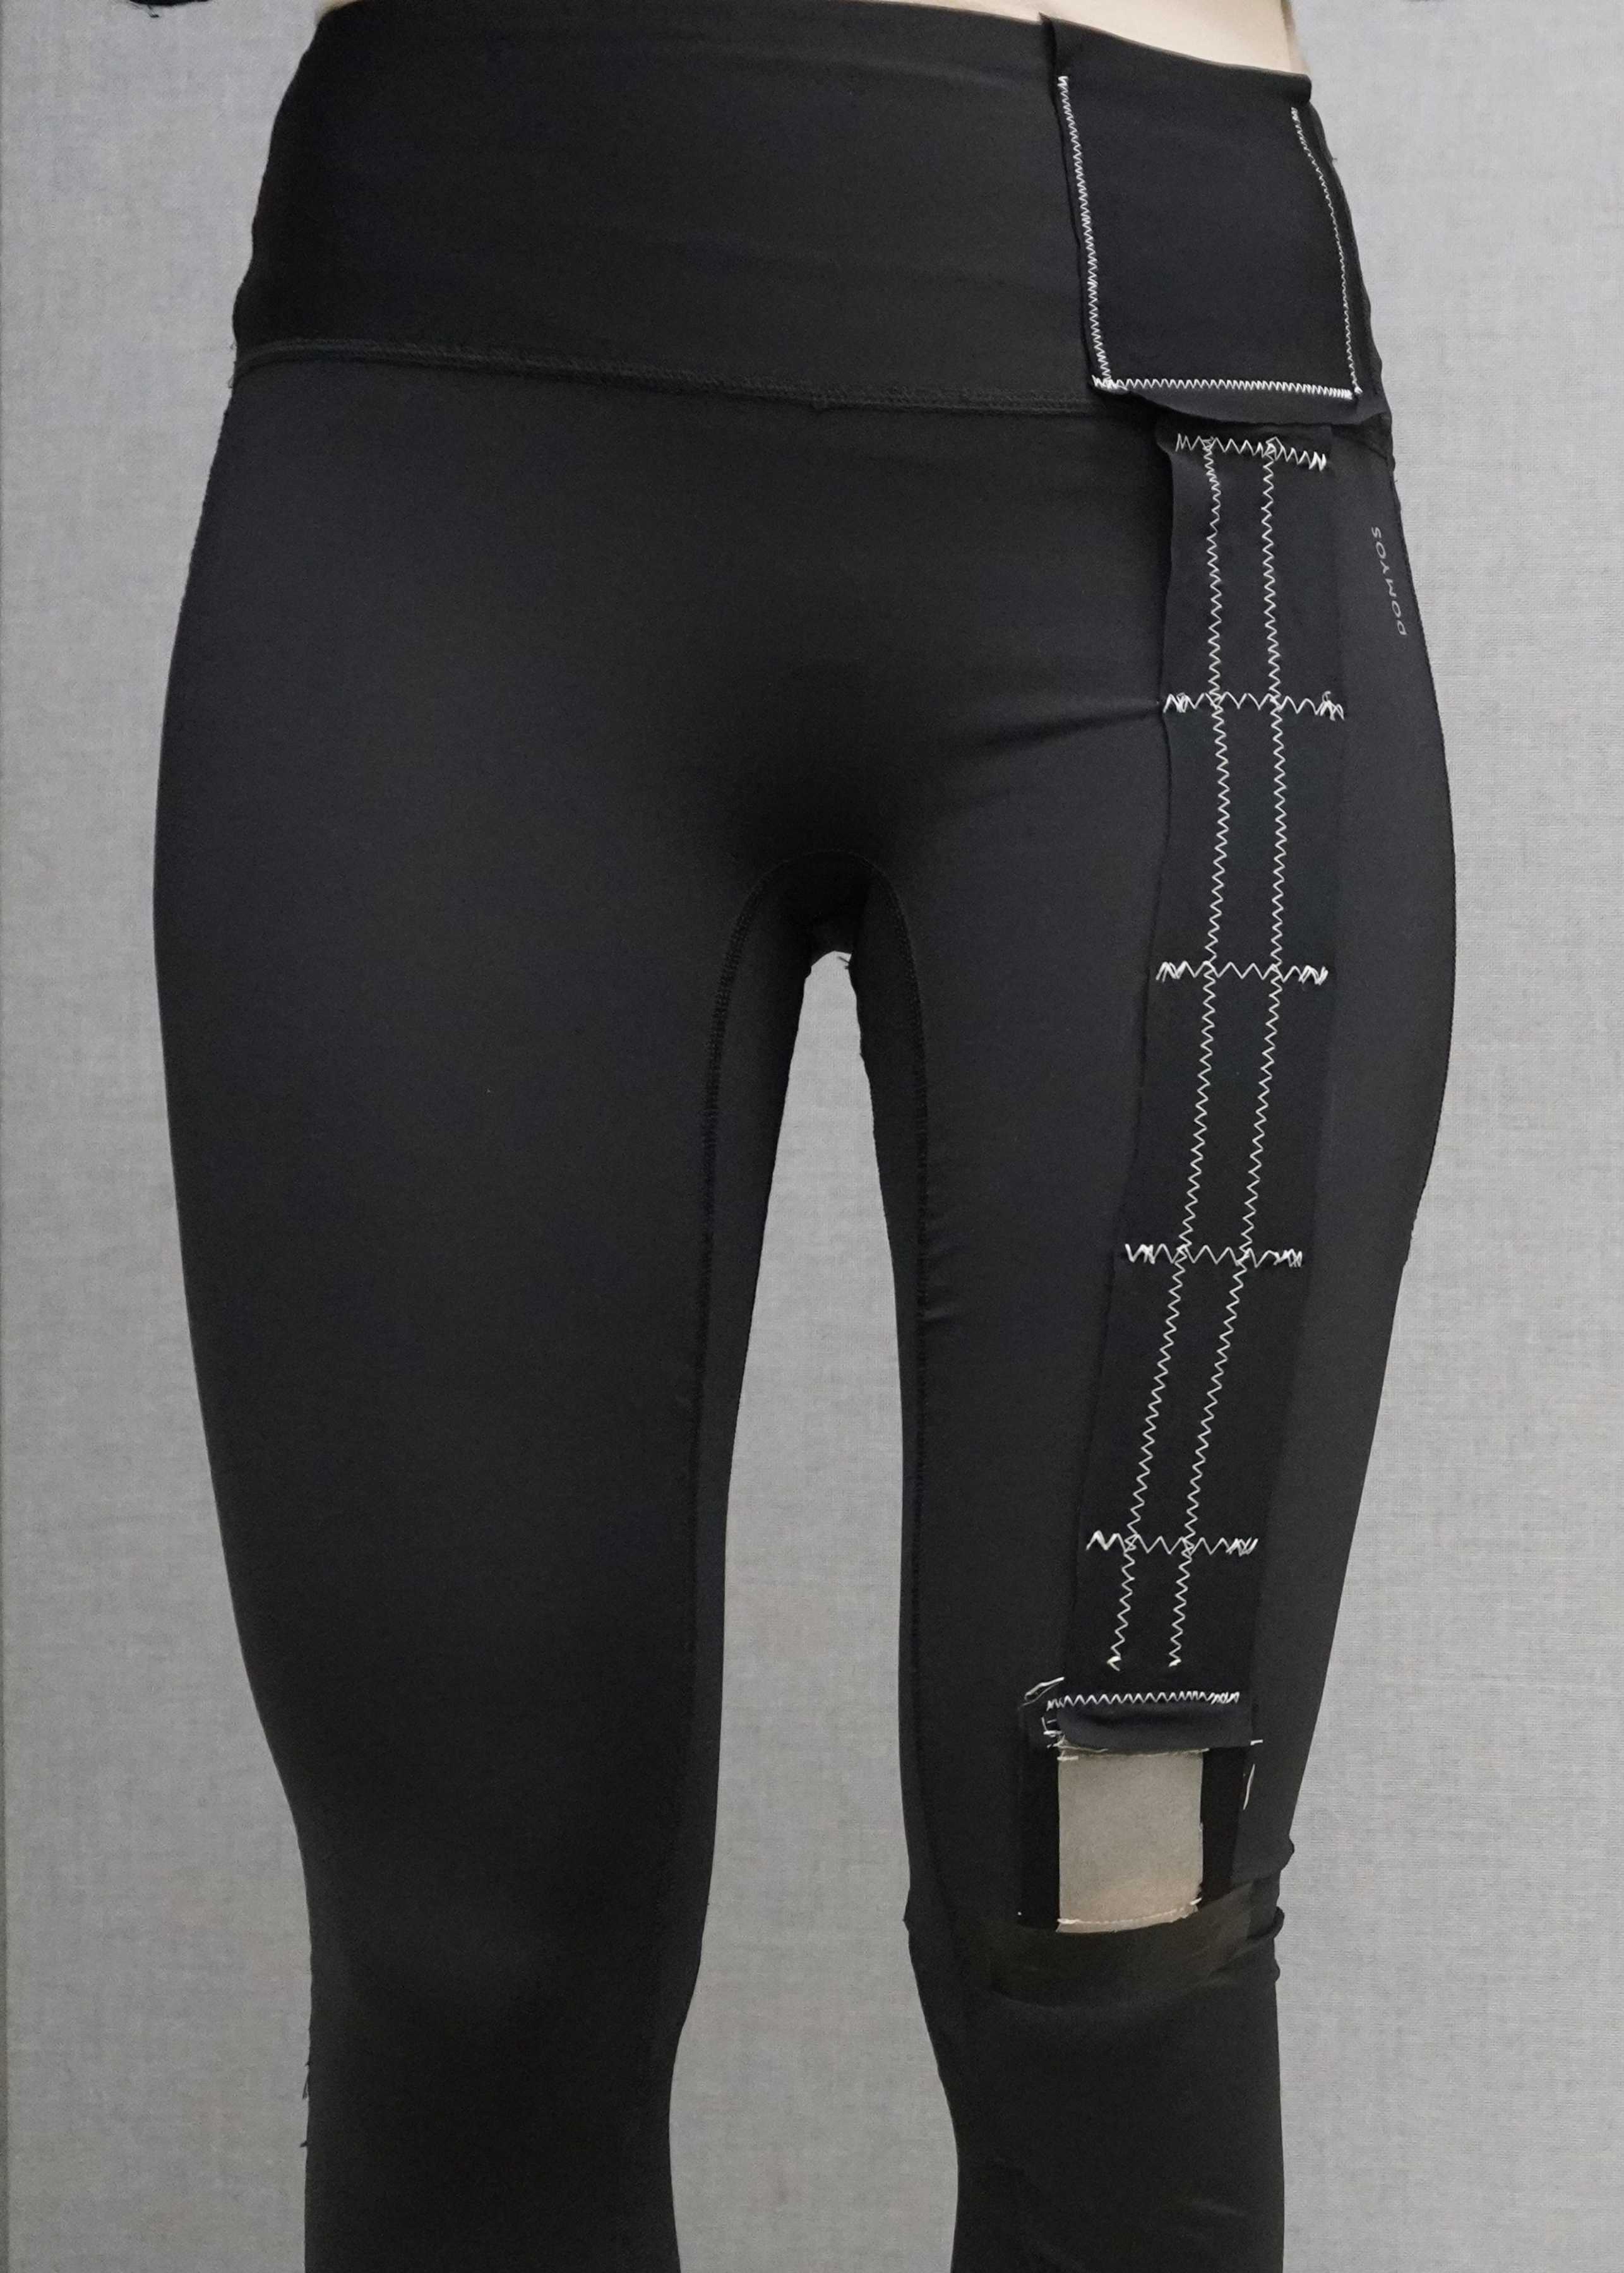 Enlarged view: A woman wears the running pants with integrated textile sensors.